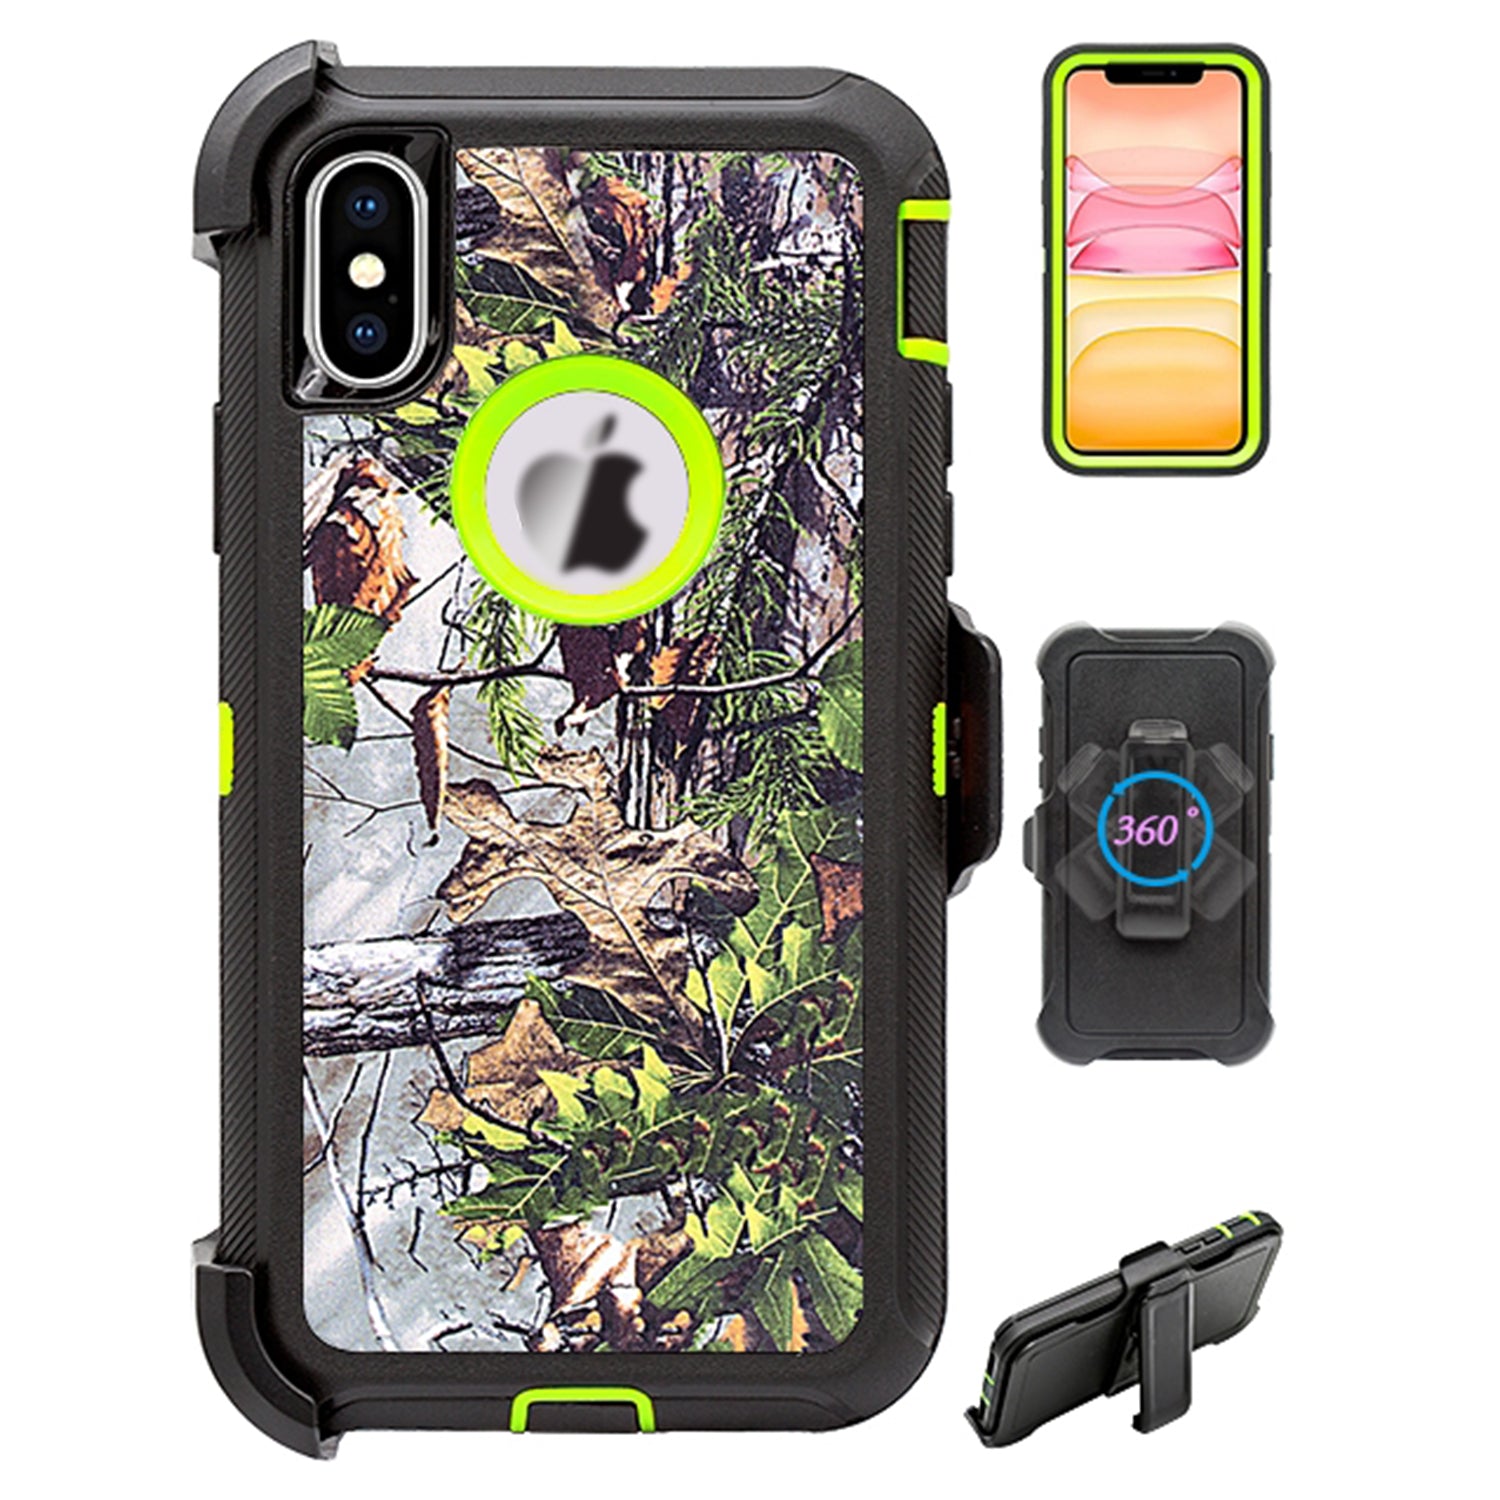 Design Full Protection Heavy Duty Case for Apple iPhone Xs Max(6.5")